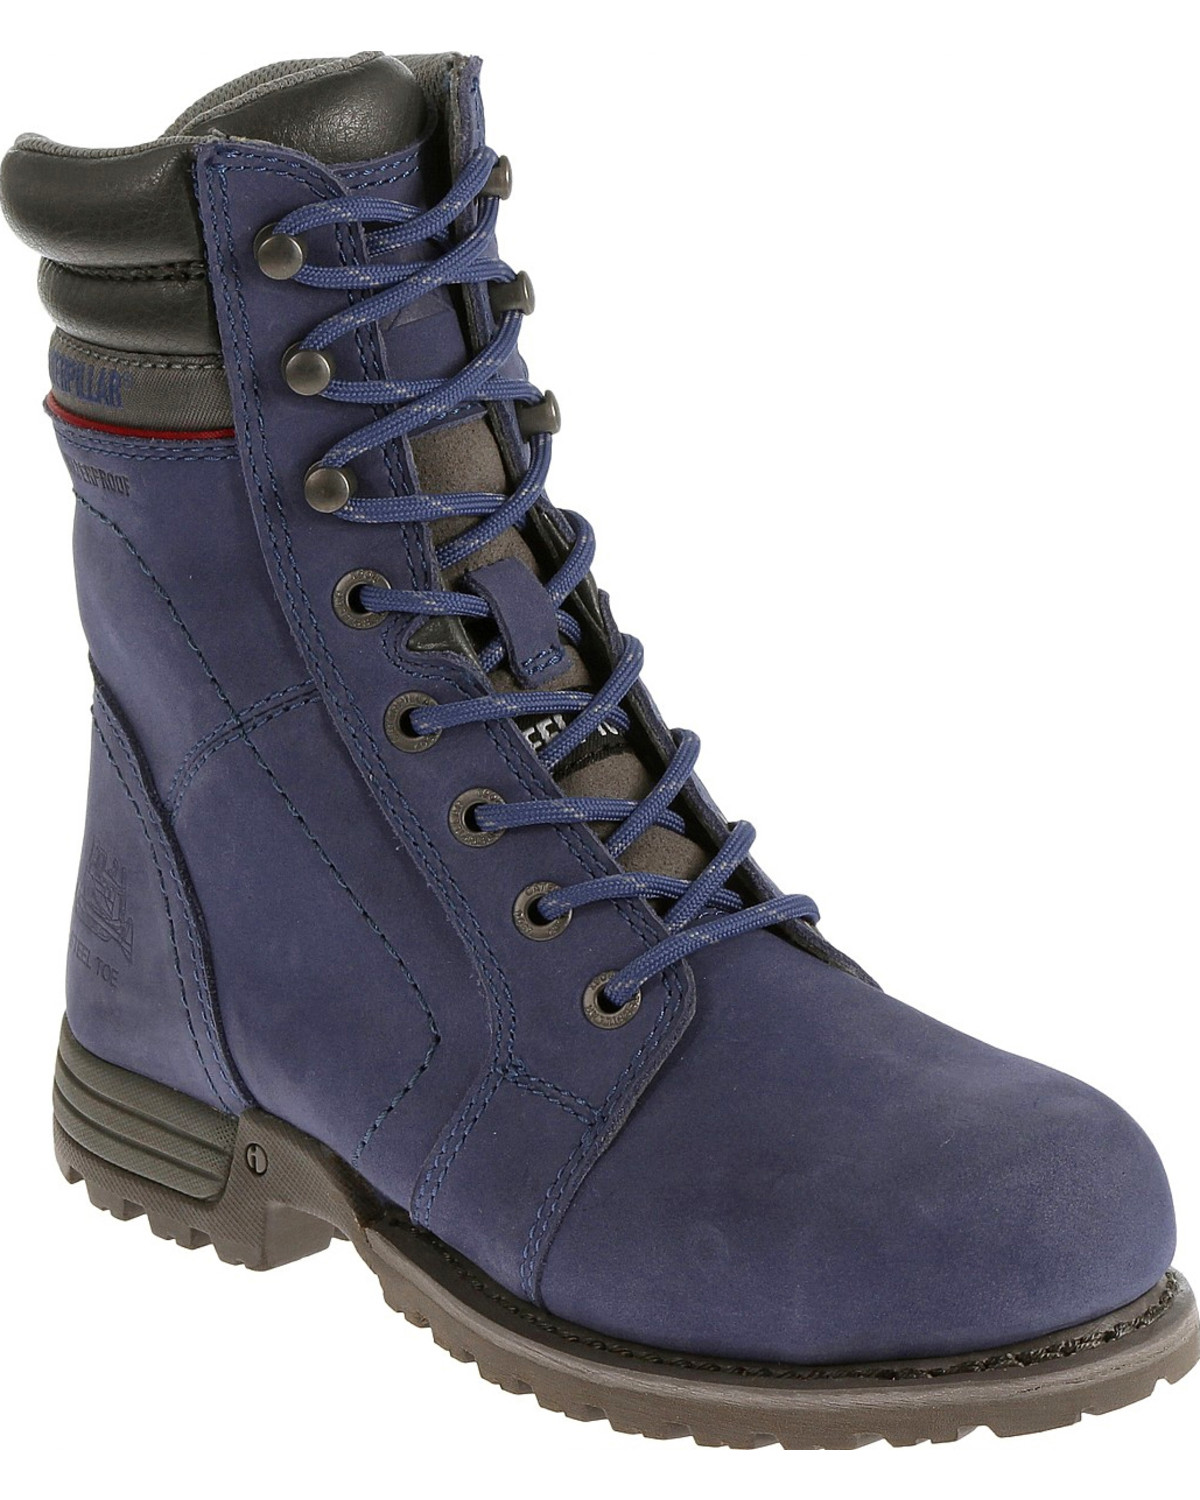 women's safety toe boots